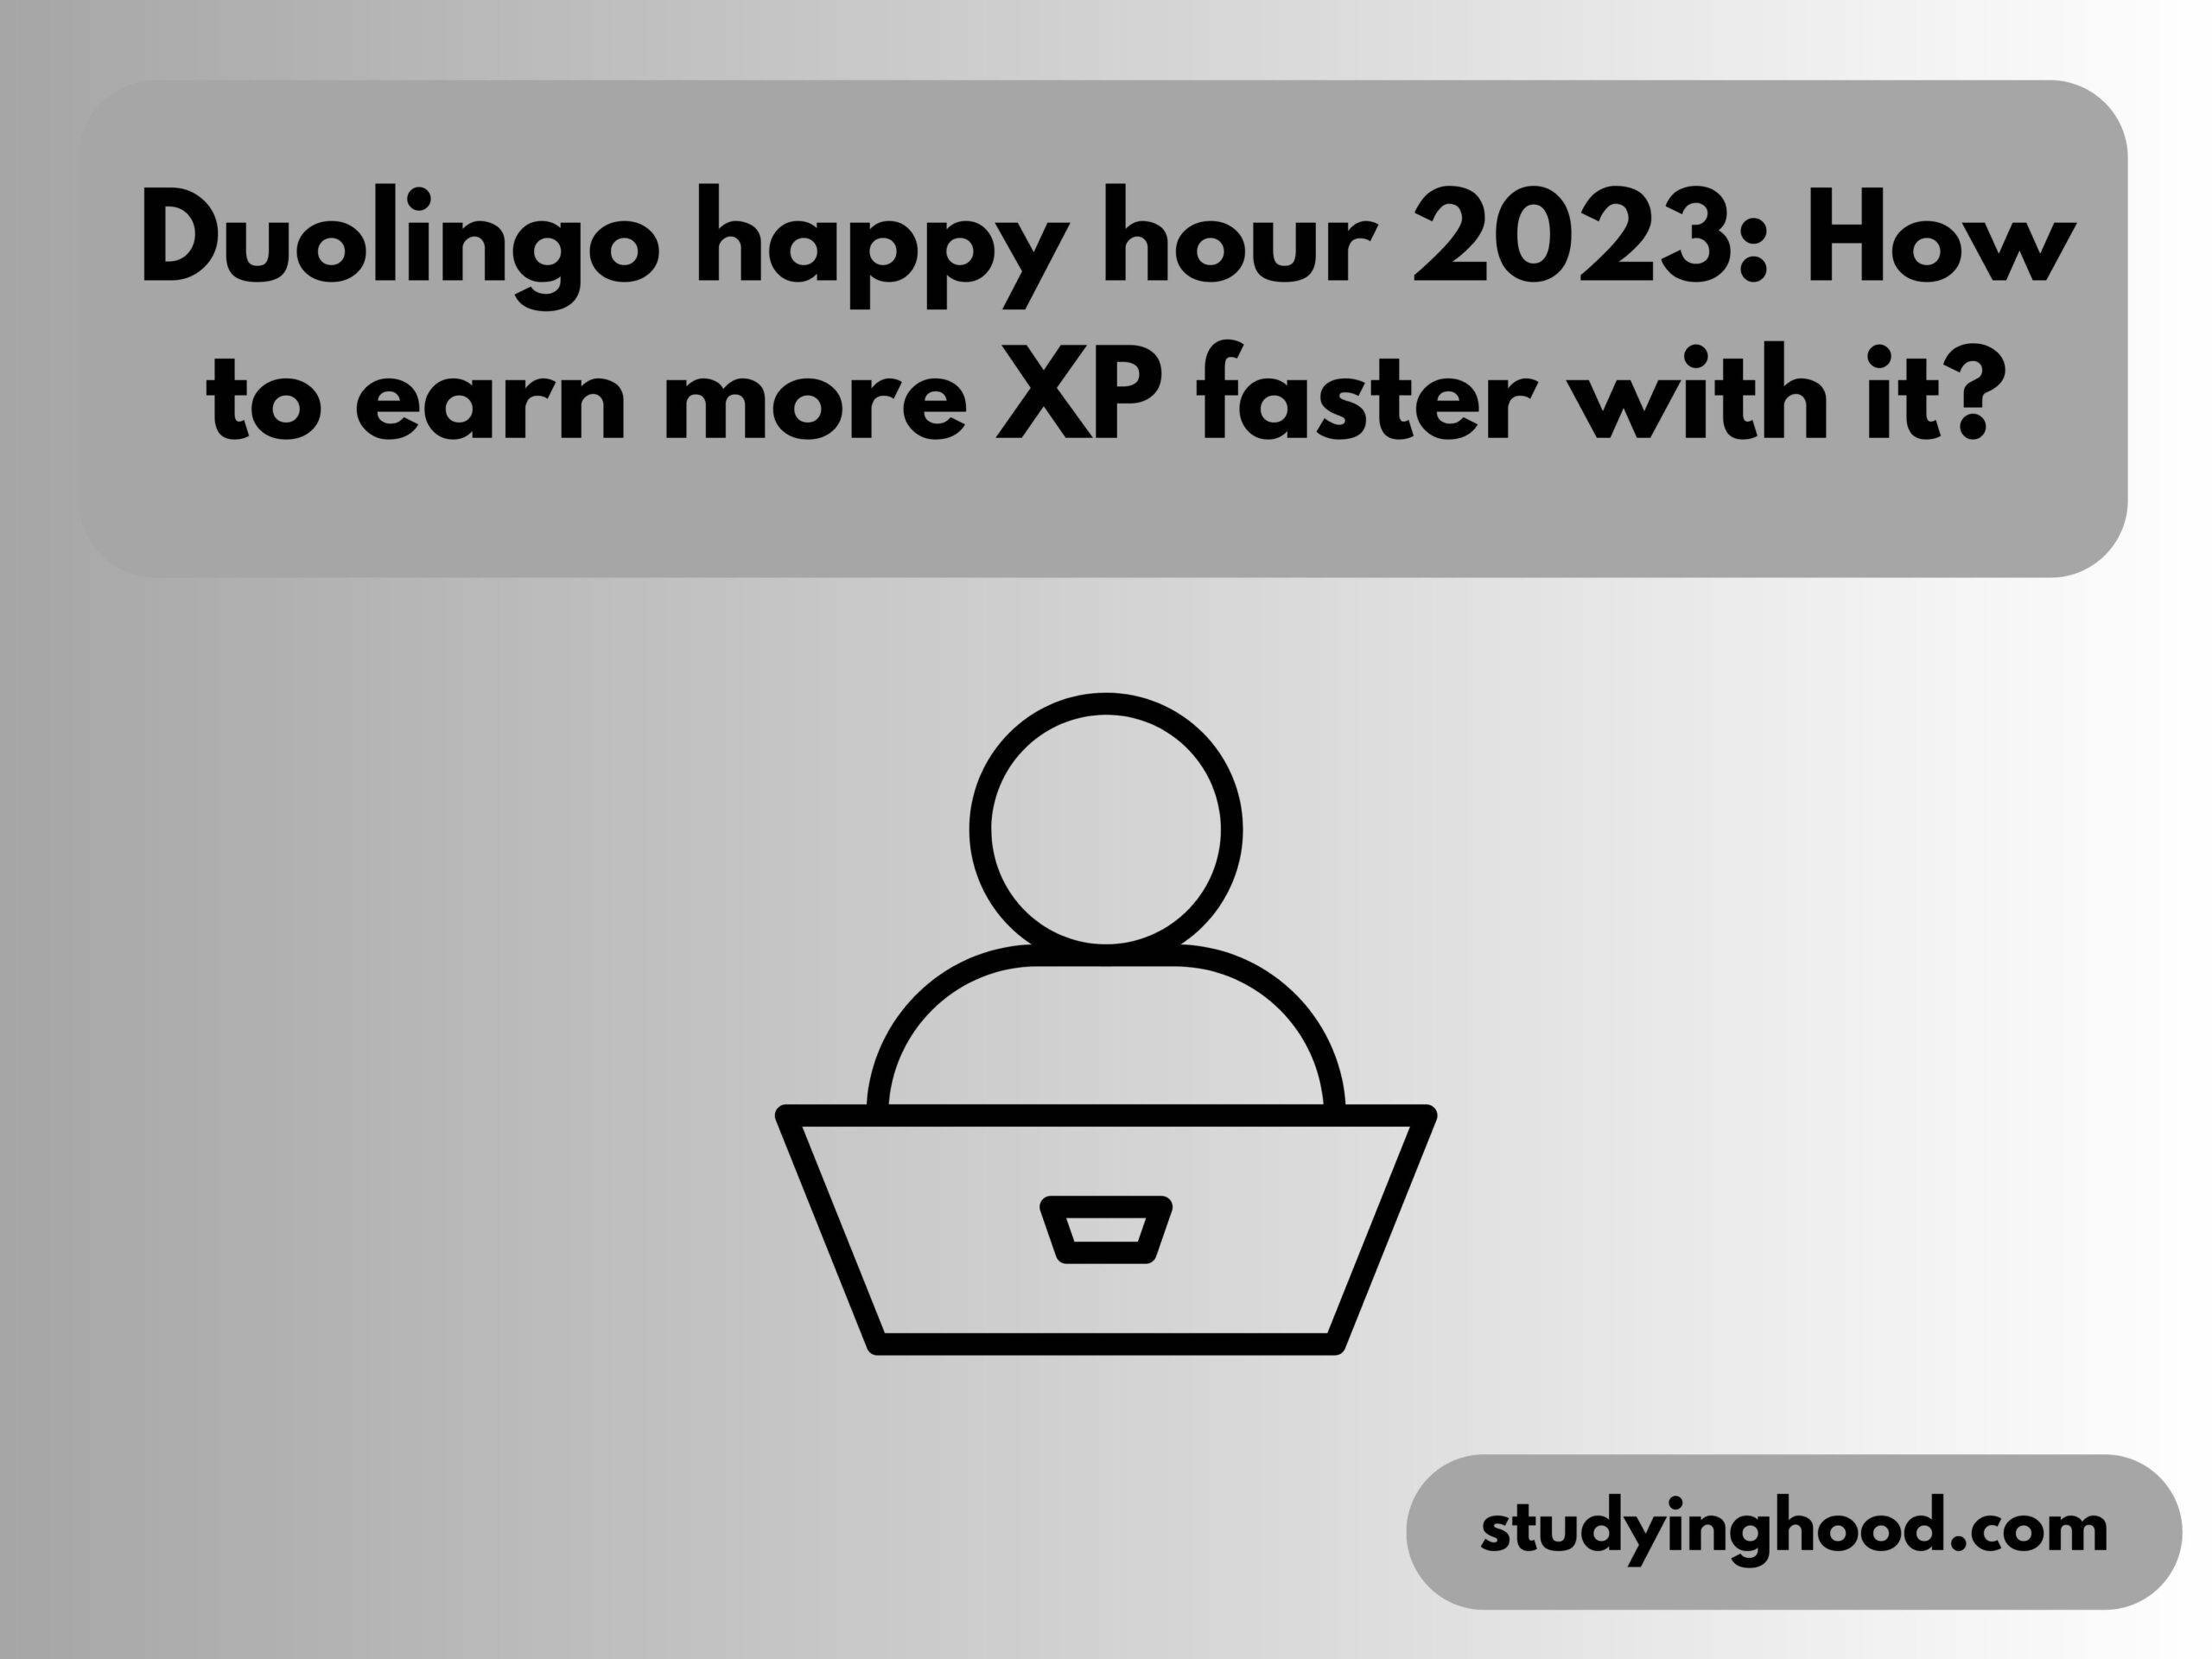 Duolingo happy hour 2023 How to earn more XP faster with it